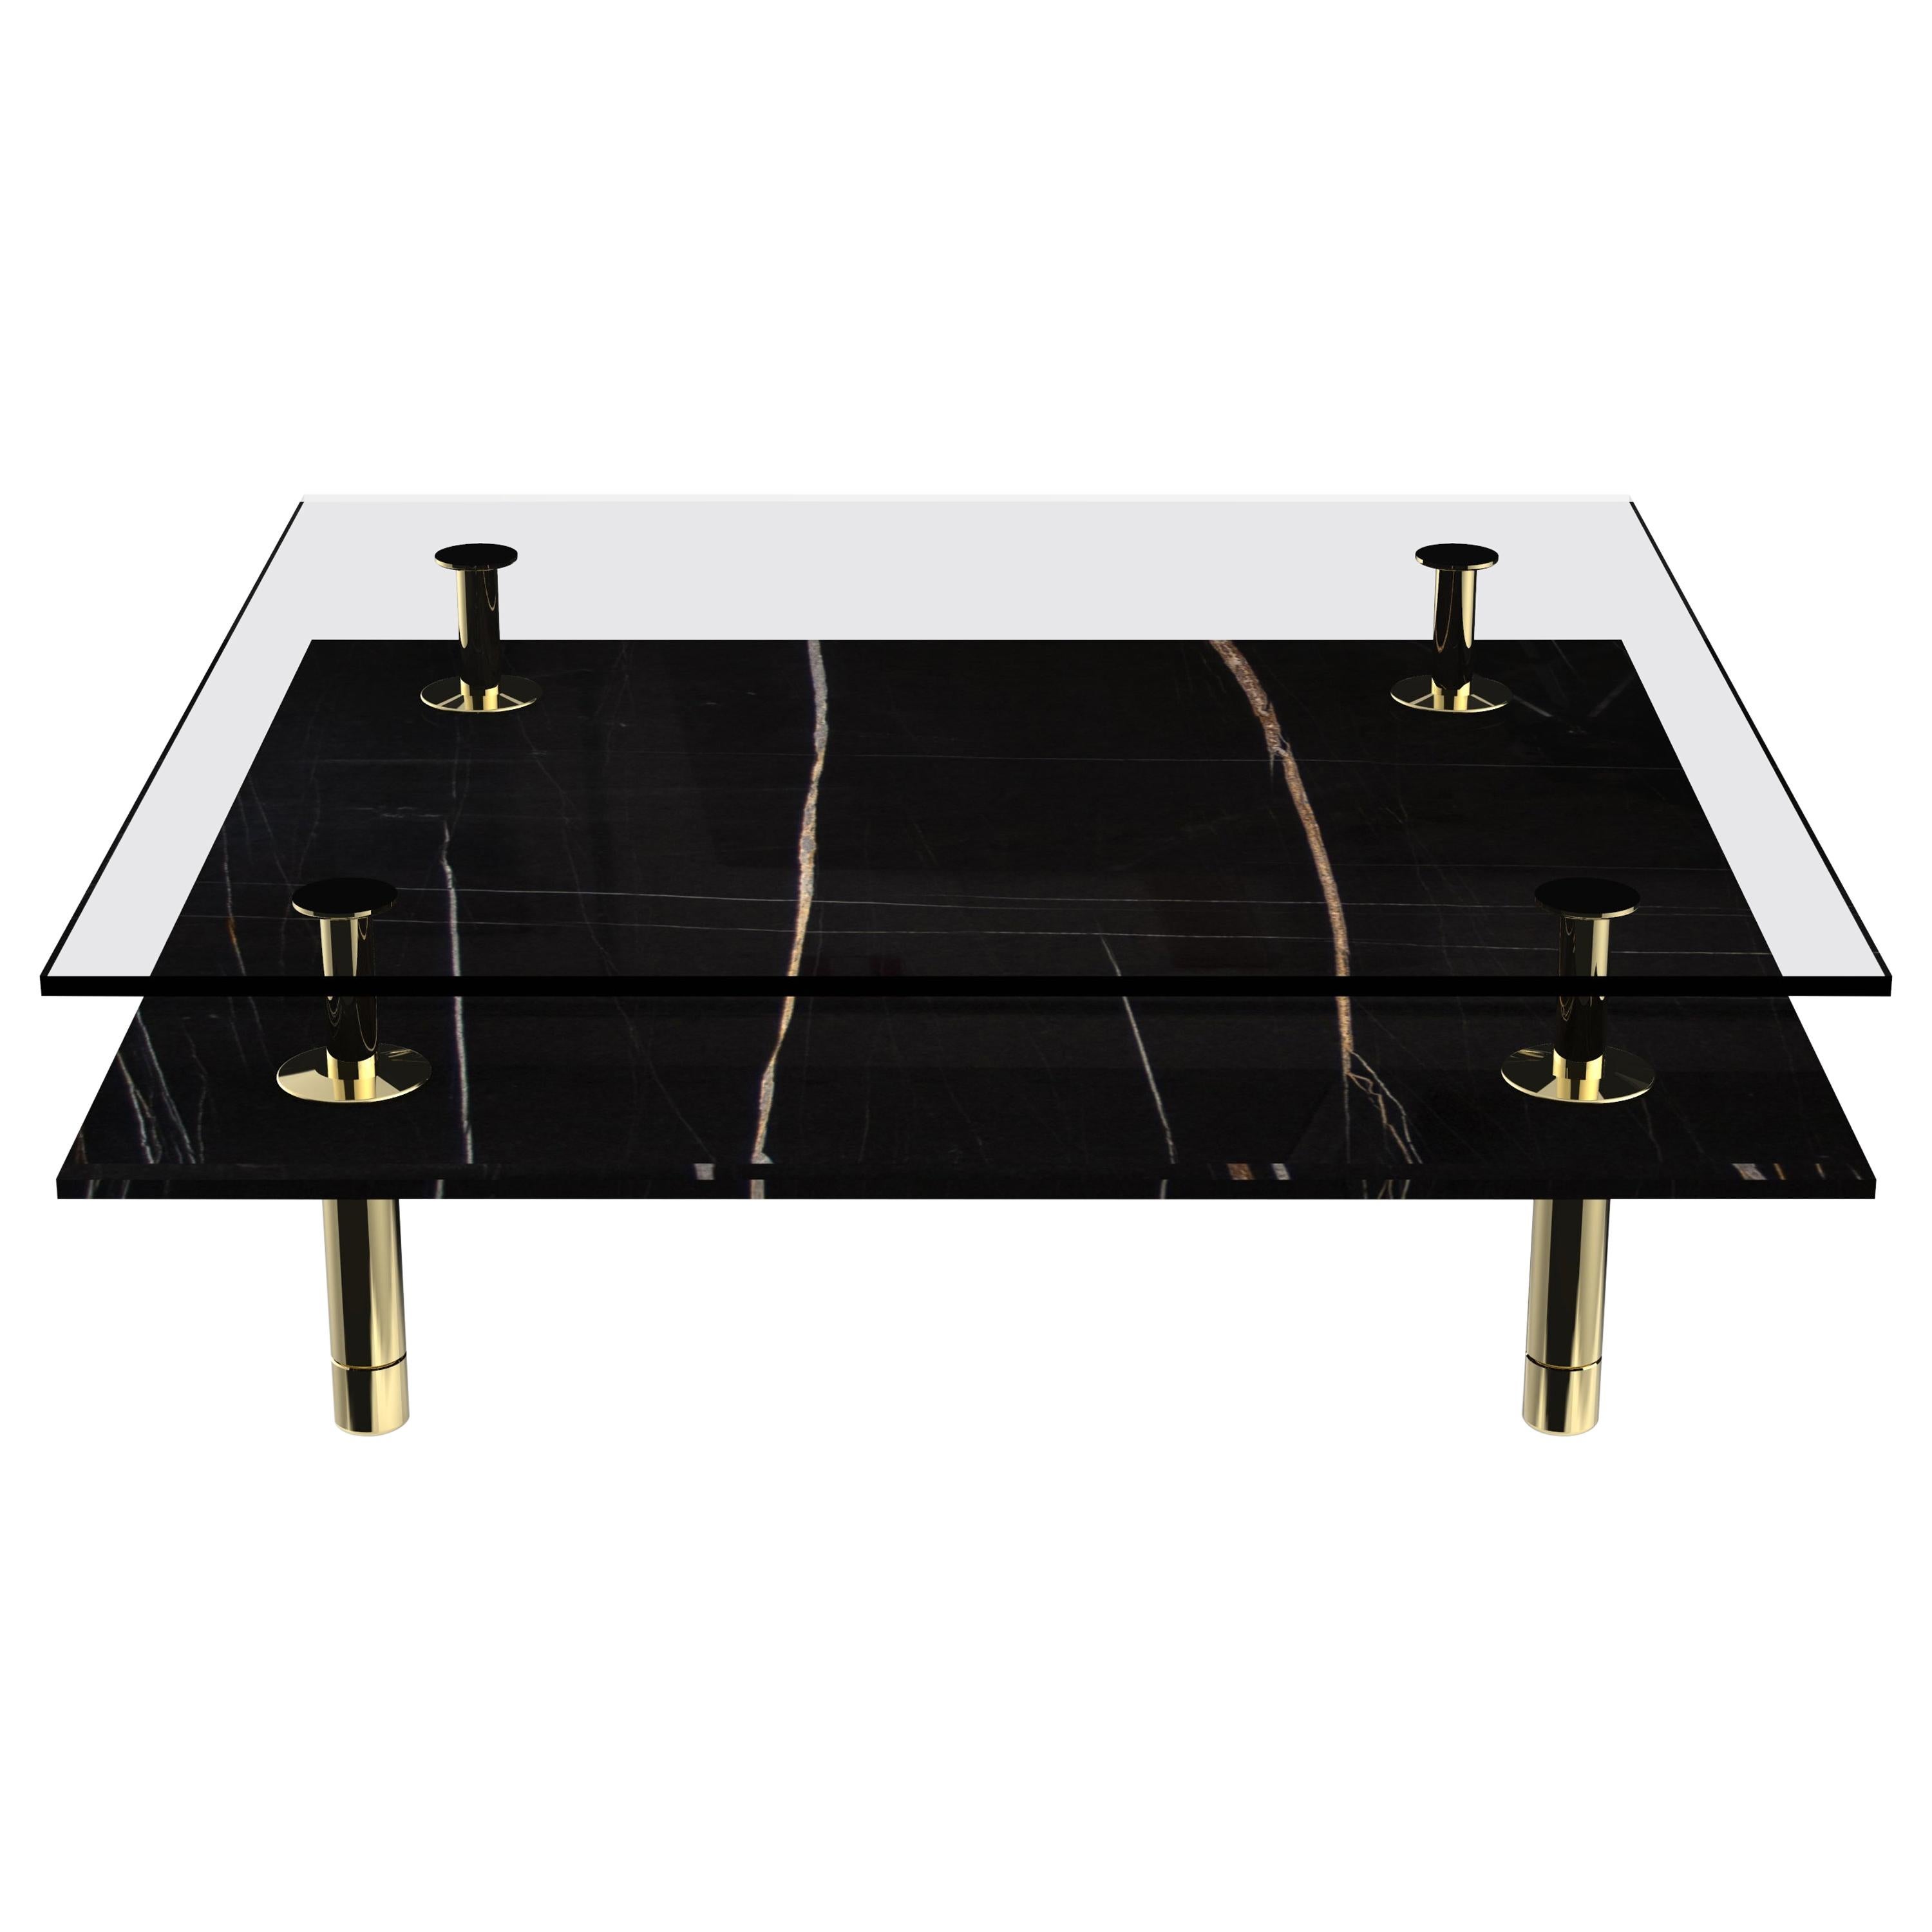 Legs Square Coffee Table with Sahara Noir Marble Top and Polished Brass